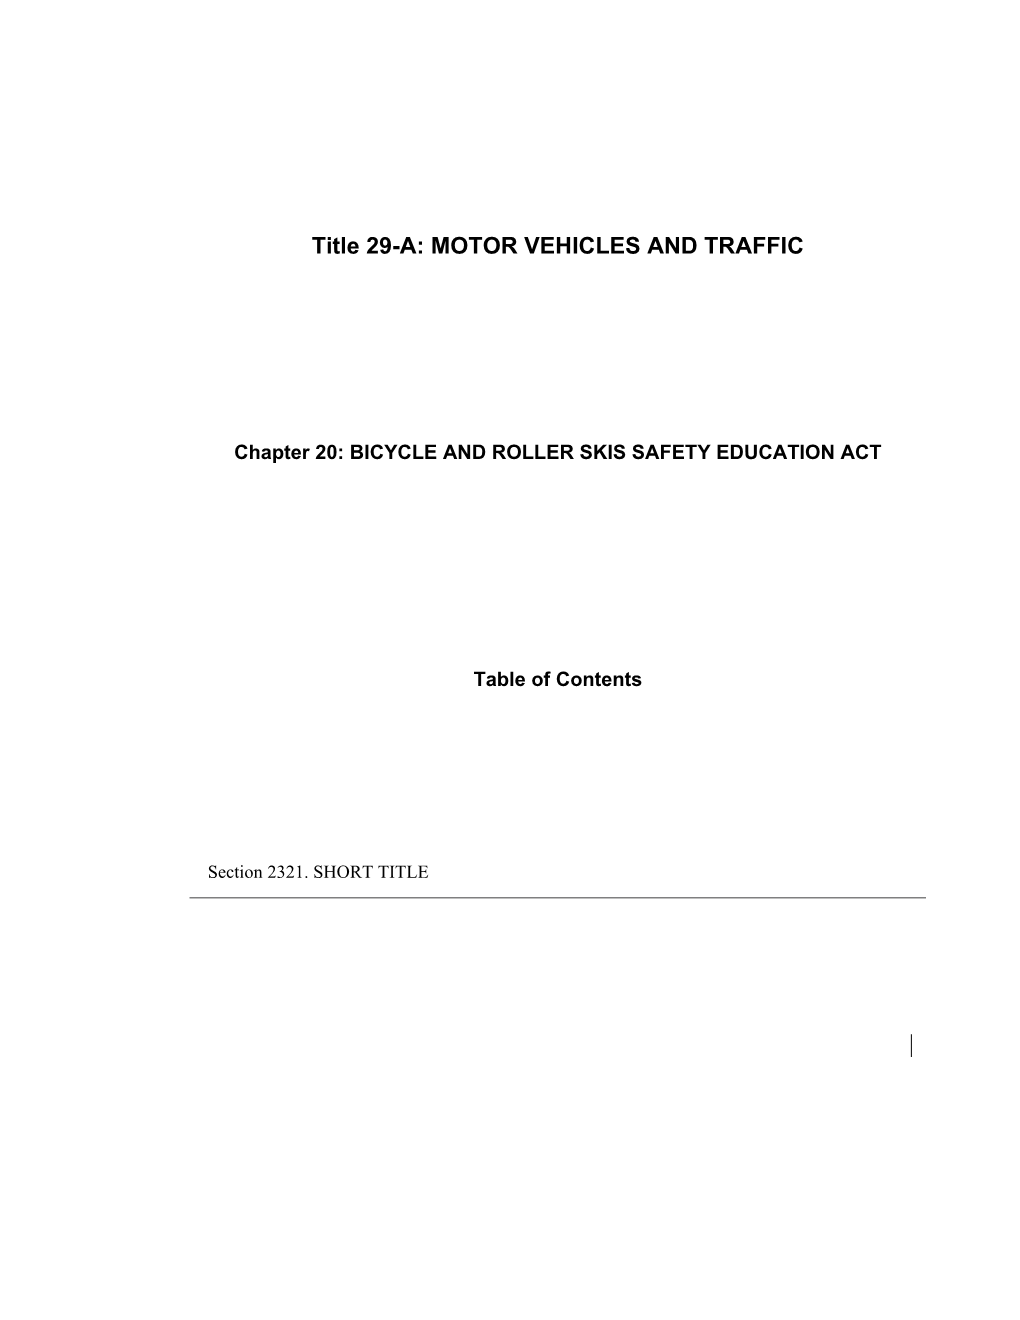 MRS Title 29-A, Chapter20: BICYCLE and ROLLER SKIS SAFETY EDUCATION ACT